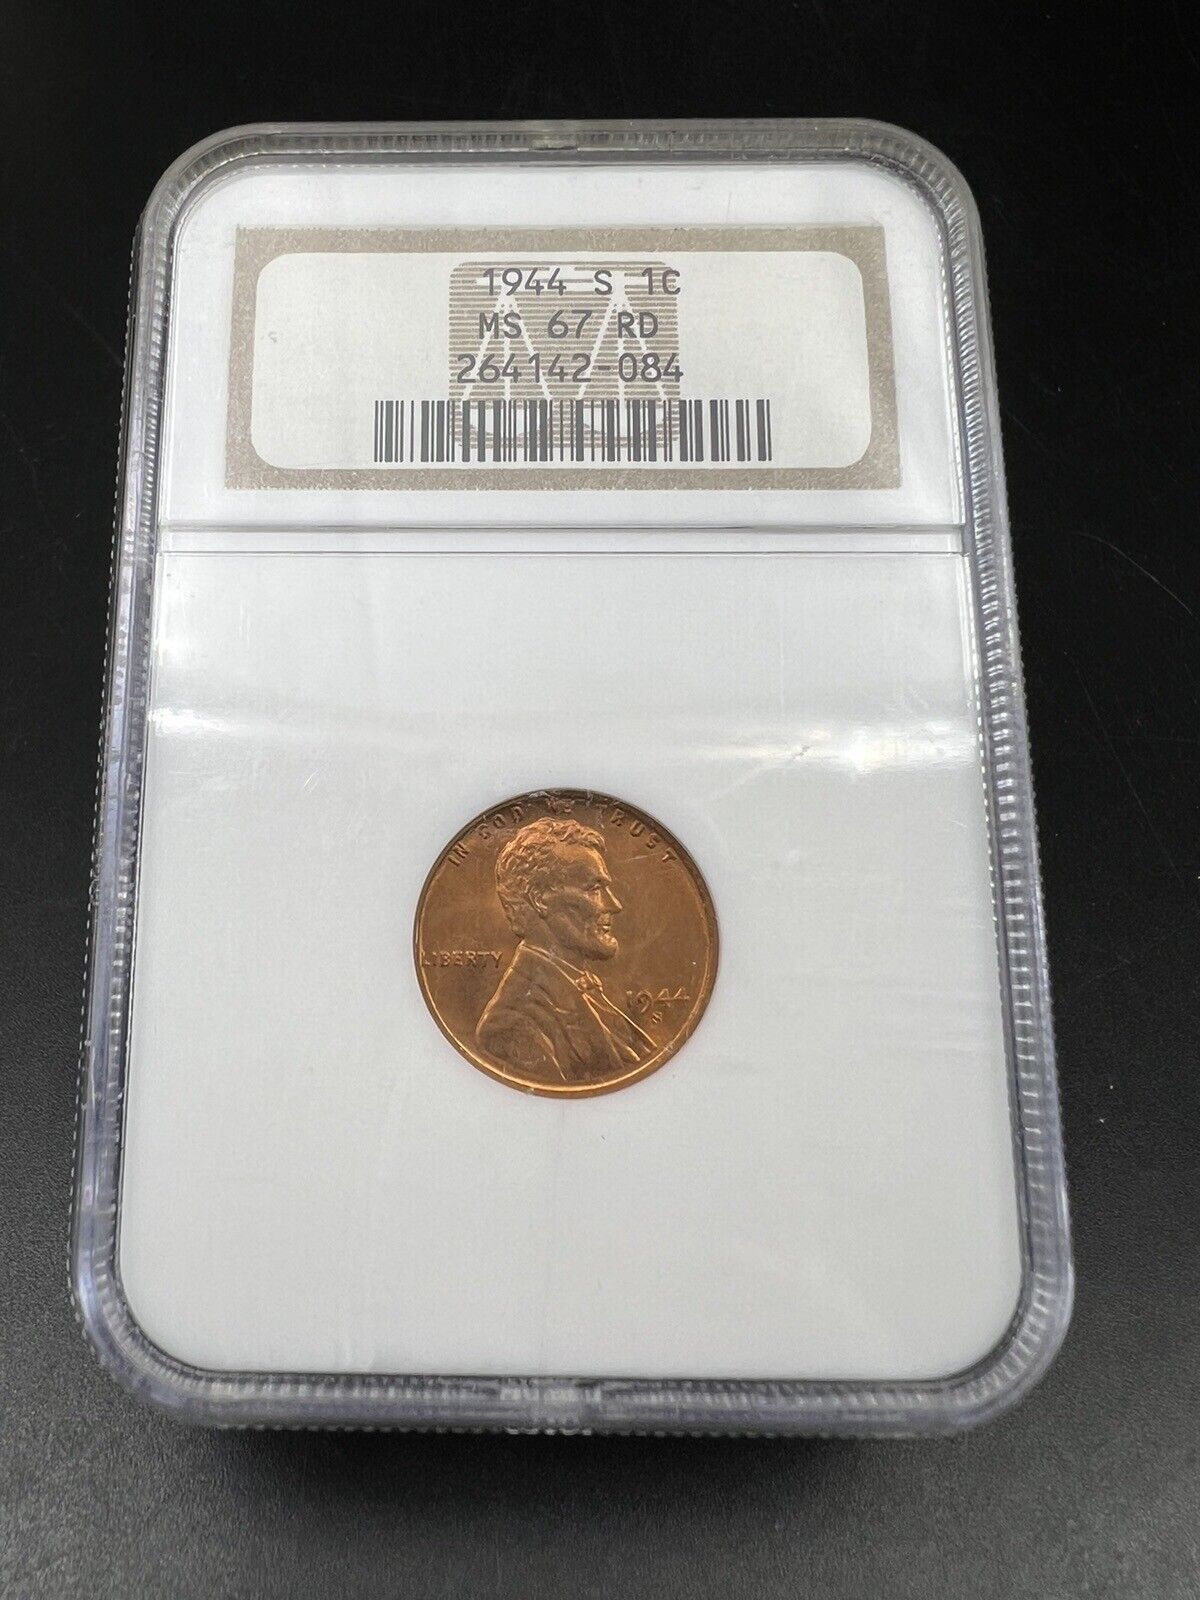 1944 S 1c Lincoln Wheat Cent Penny Coin NGC MS67 RD Gem BU Certified #084